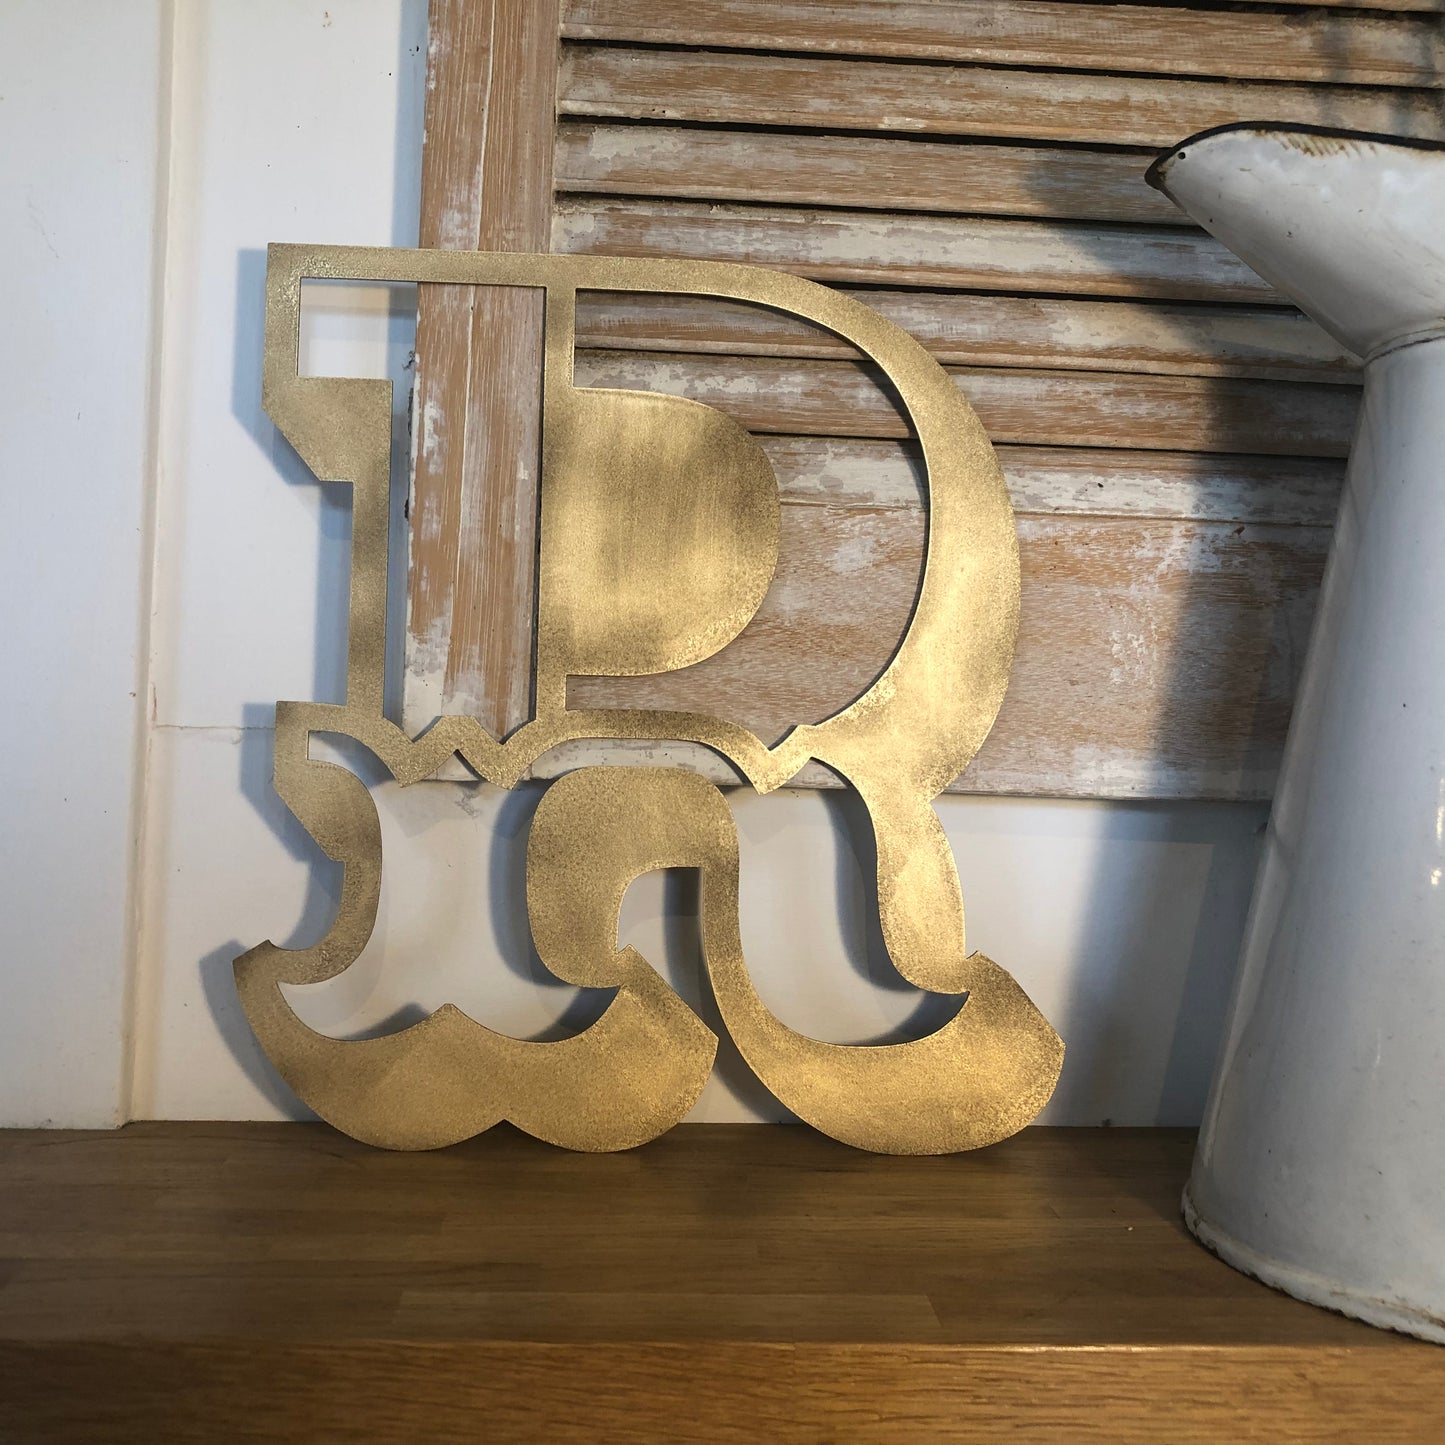 A-Z Rustic 5" or 12" Gold Metal Carnival Letters.